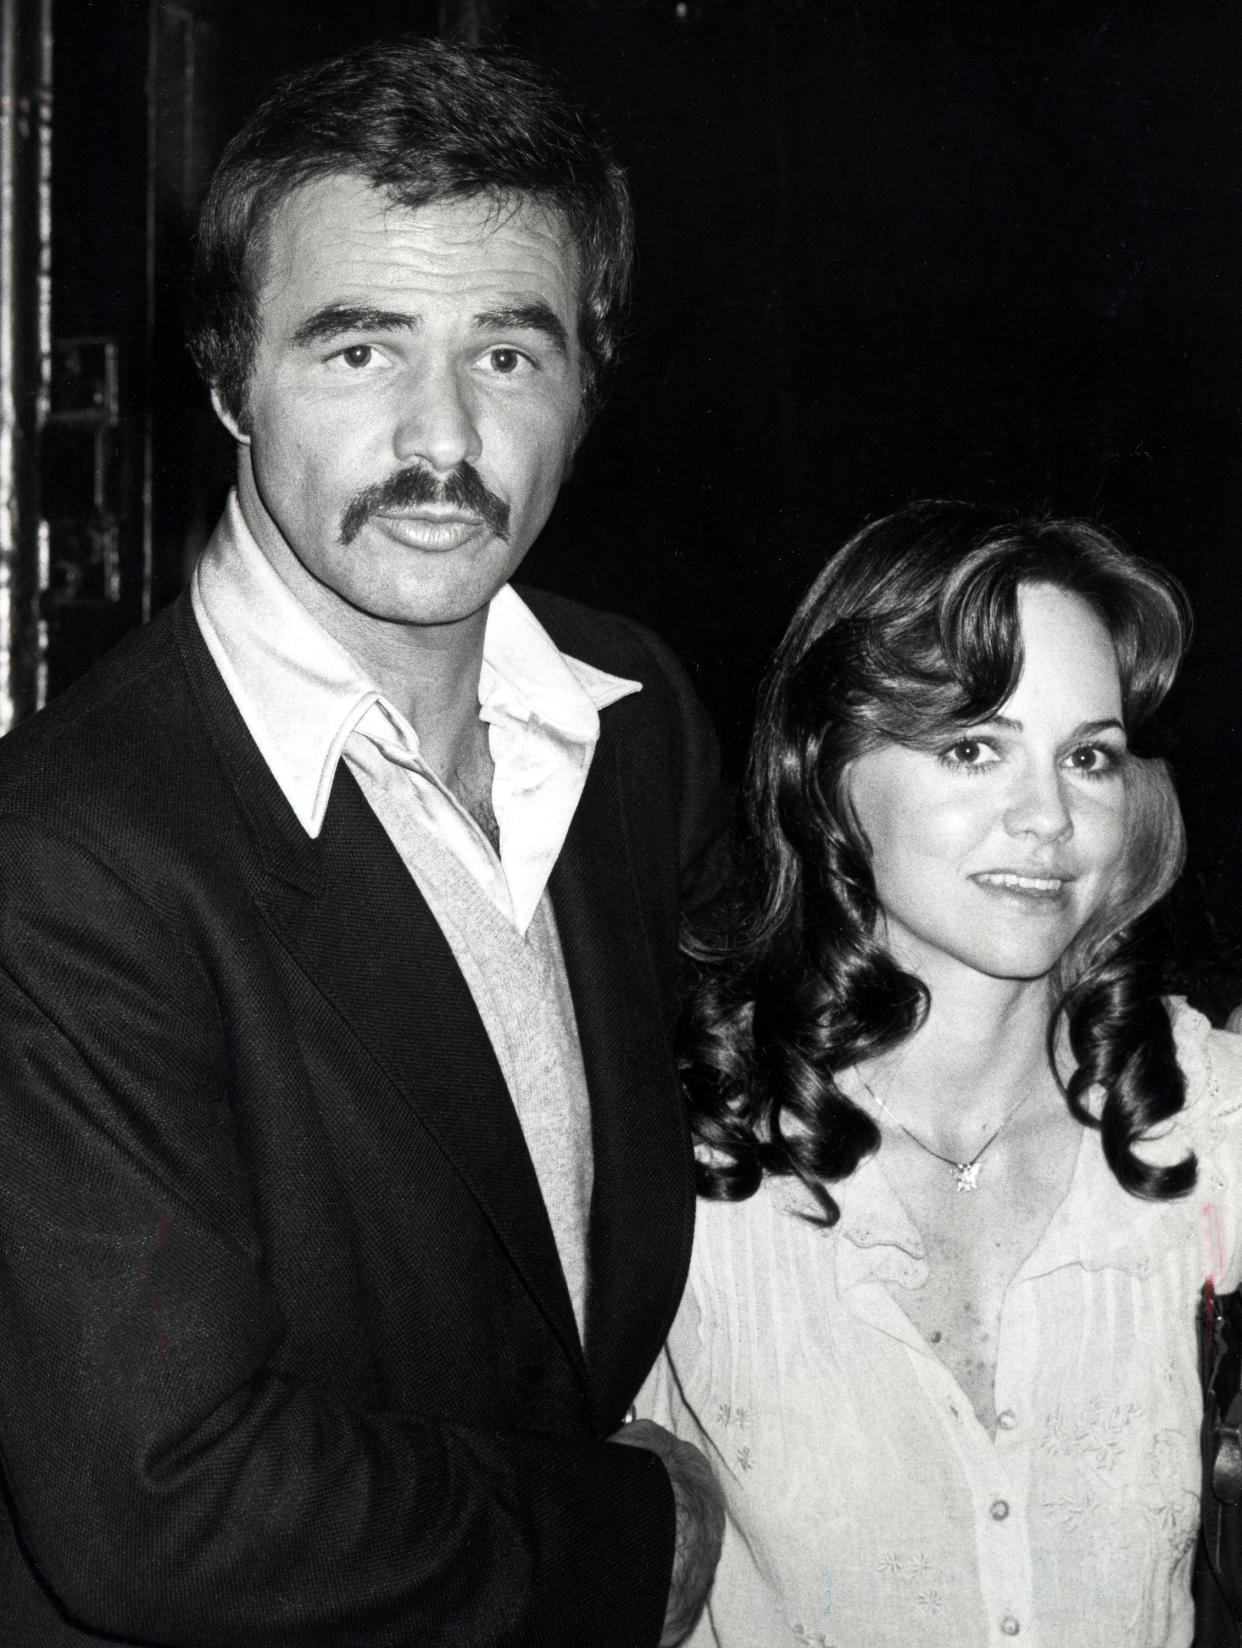 Burt Reynolds and Sally Field during Bert Reynolds and Sally Field Sighting at Steak Pit Restaurant - March 15, 1978 at Steak Pit Restaurant in Los Angeles, California, United States. (Photo by Ron Galella/Ron Galella Collection via Getty Images)